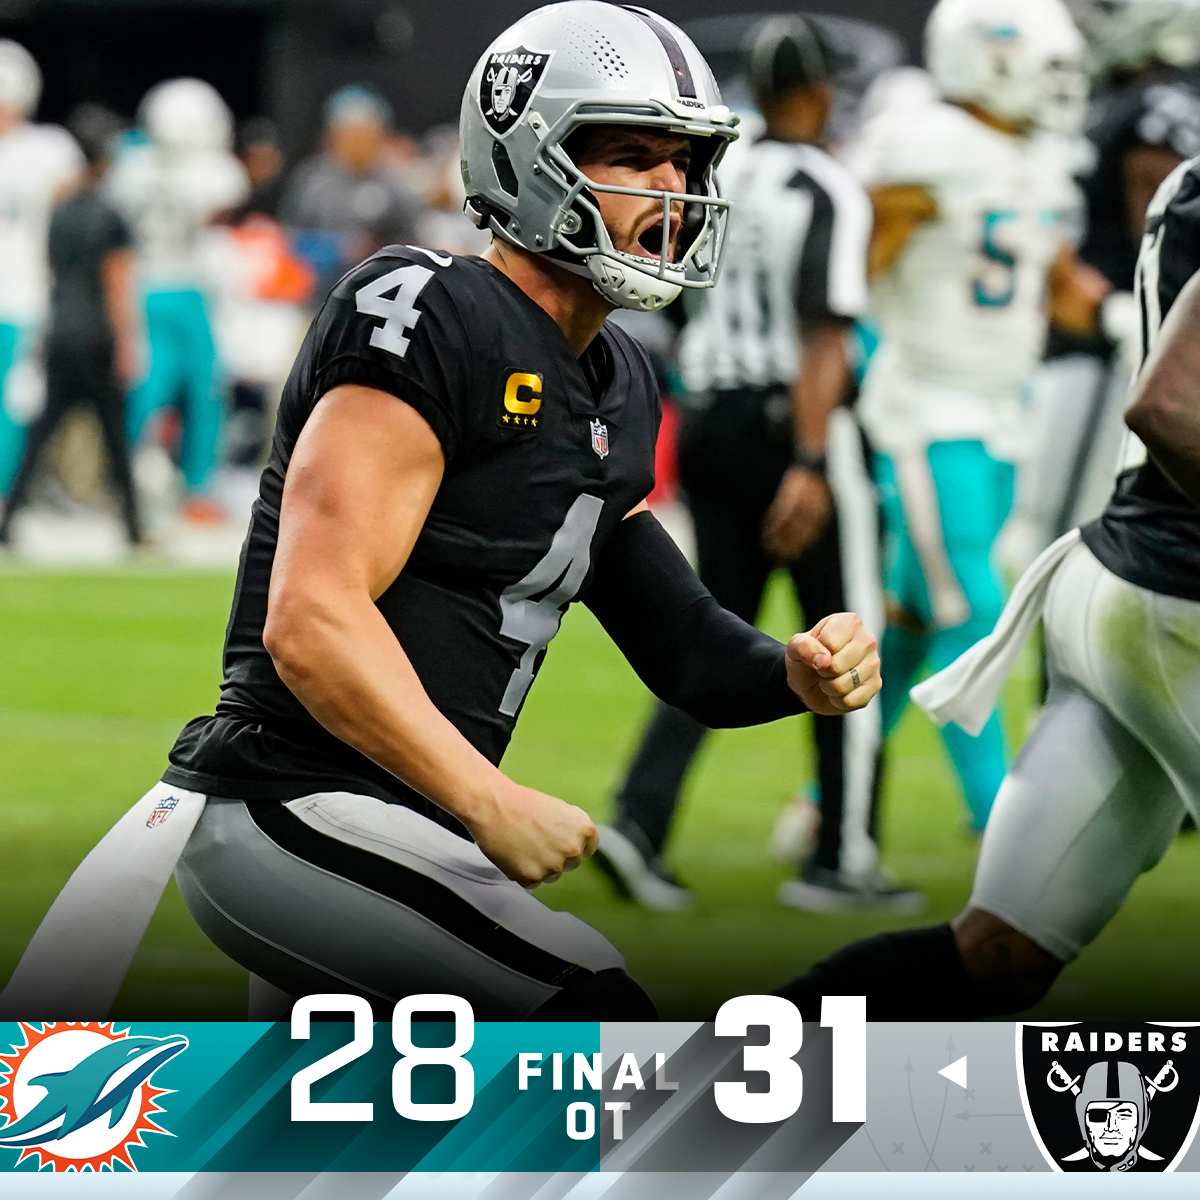 FINAL: Just win, baby. The @raiders are 3-0 for the first time since 2002! #RaiderNation #MIAvsLV